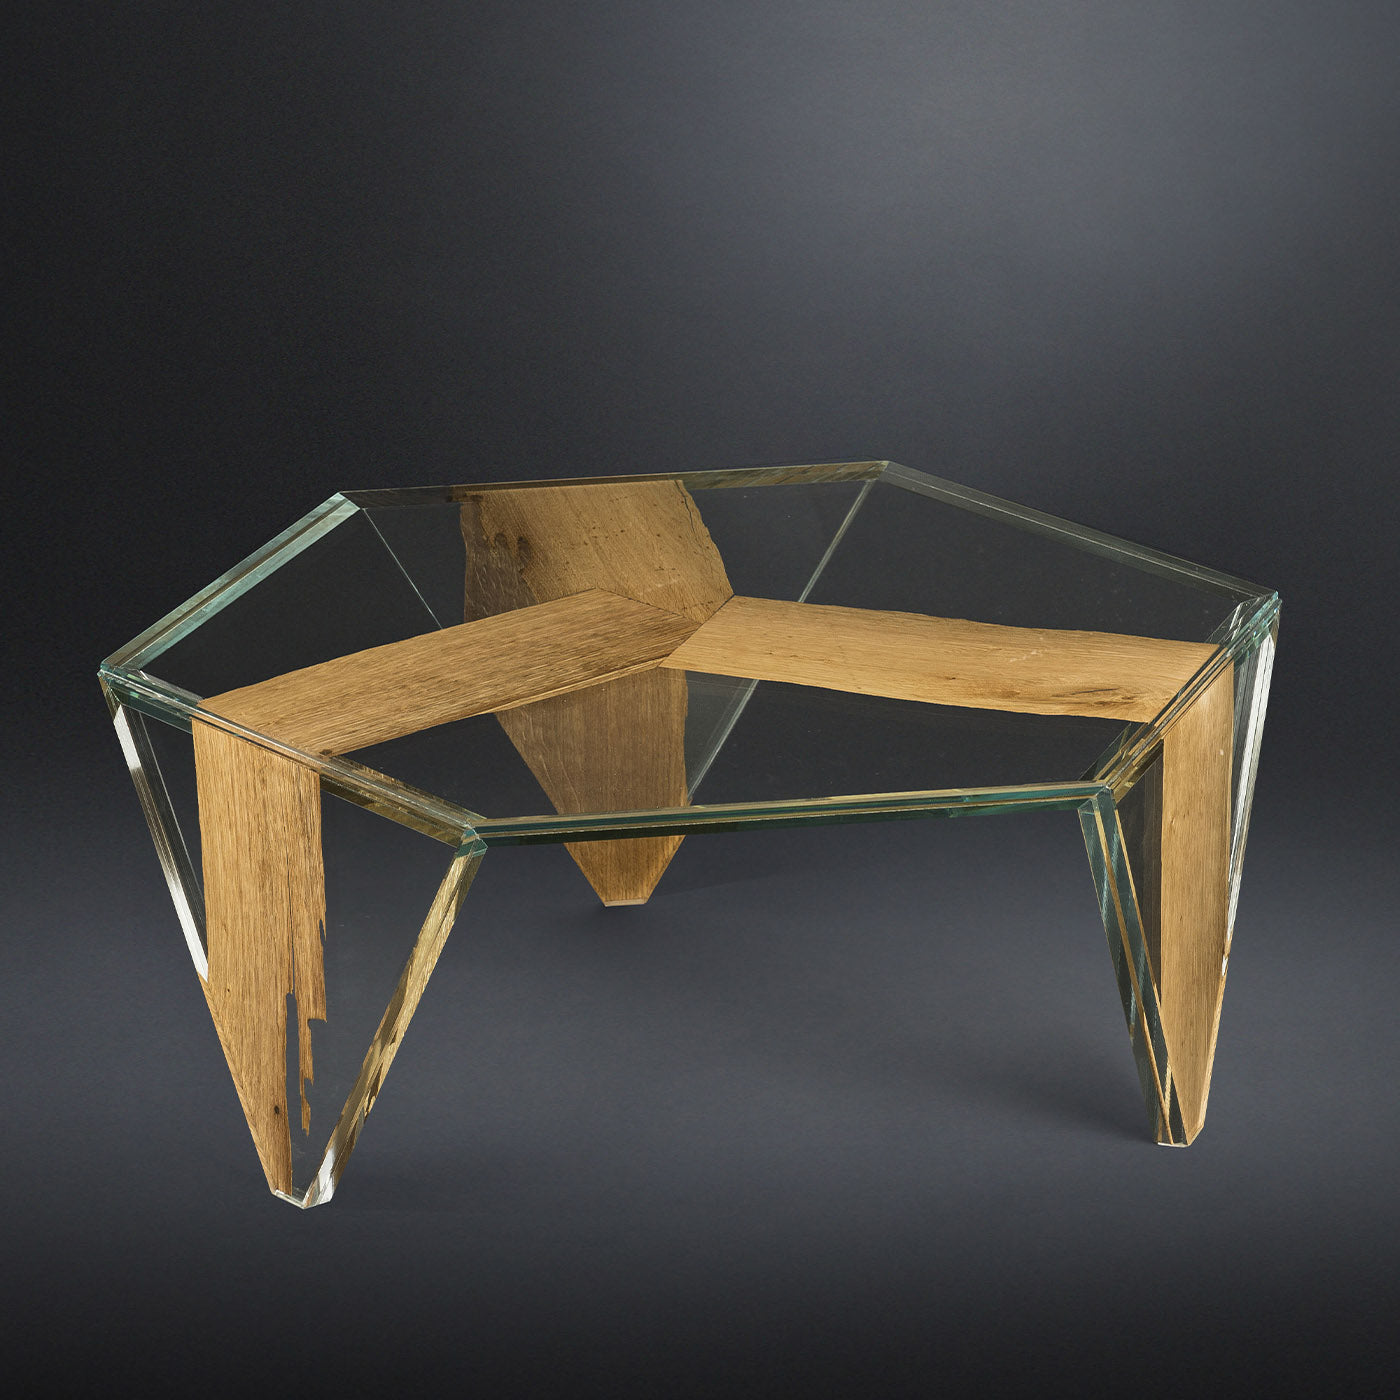 Ruche Venezia Glass and Wood Low Coffee Table - Alternative view 1